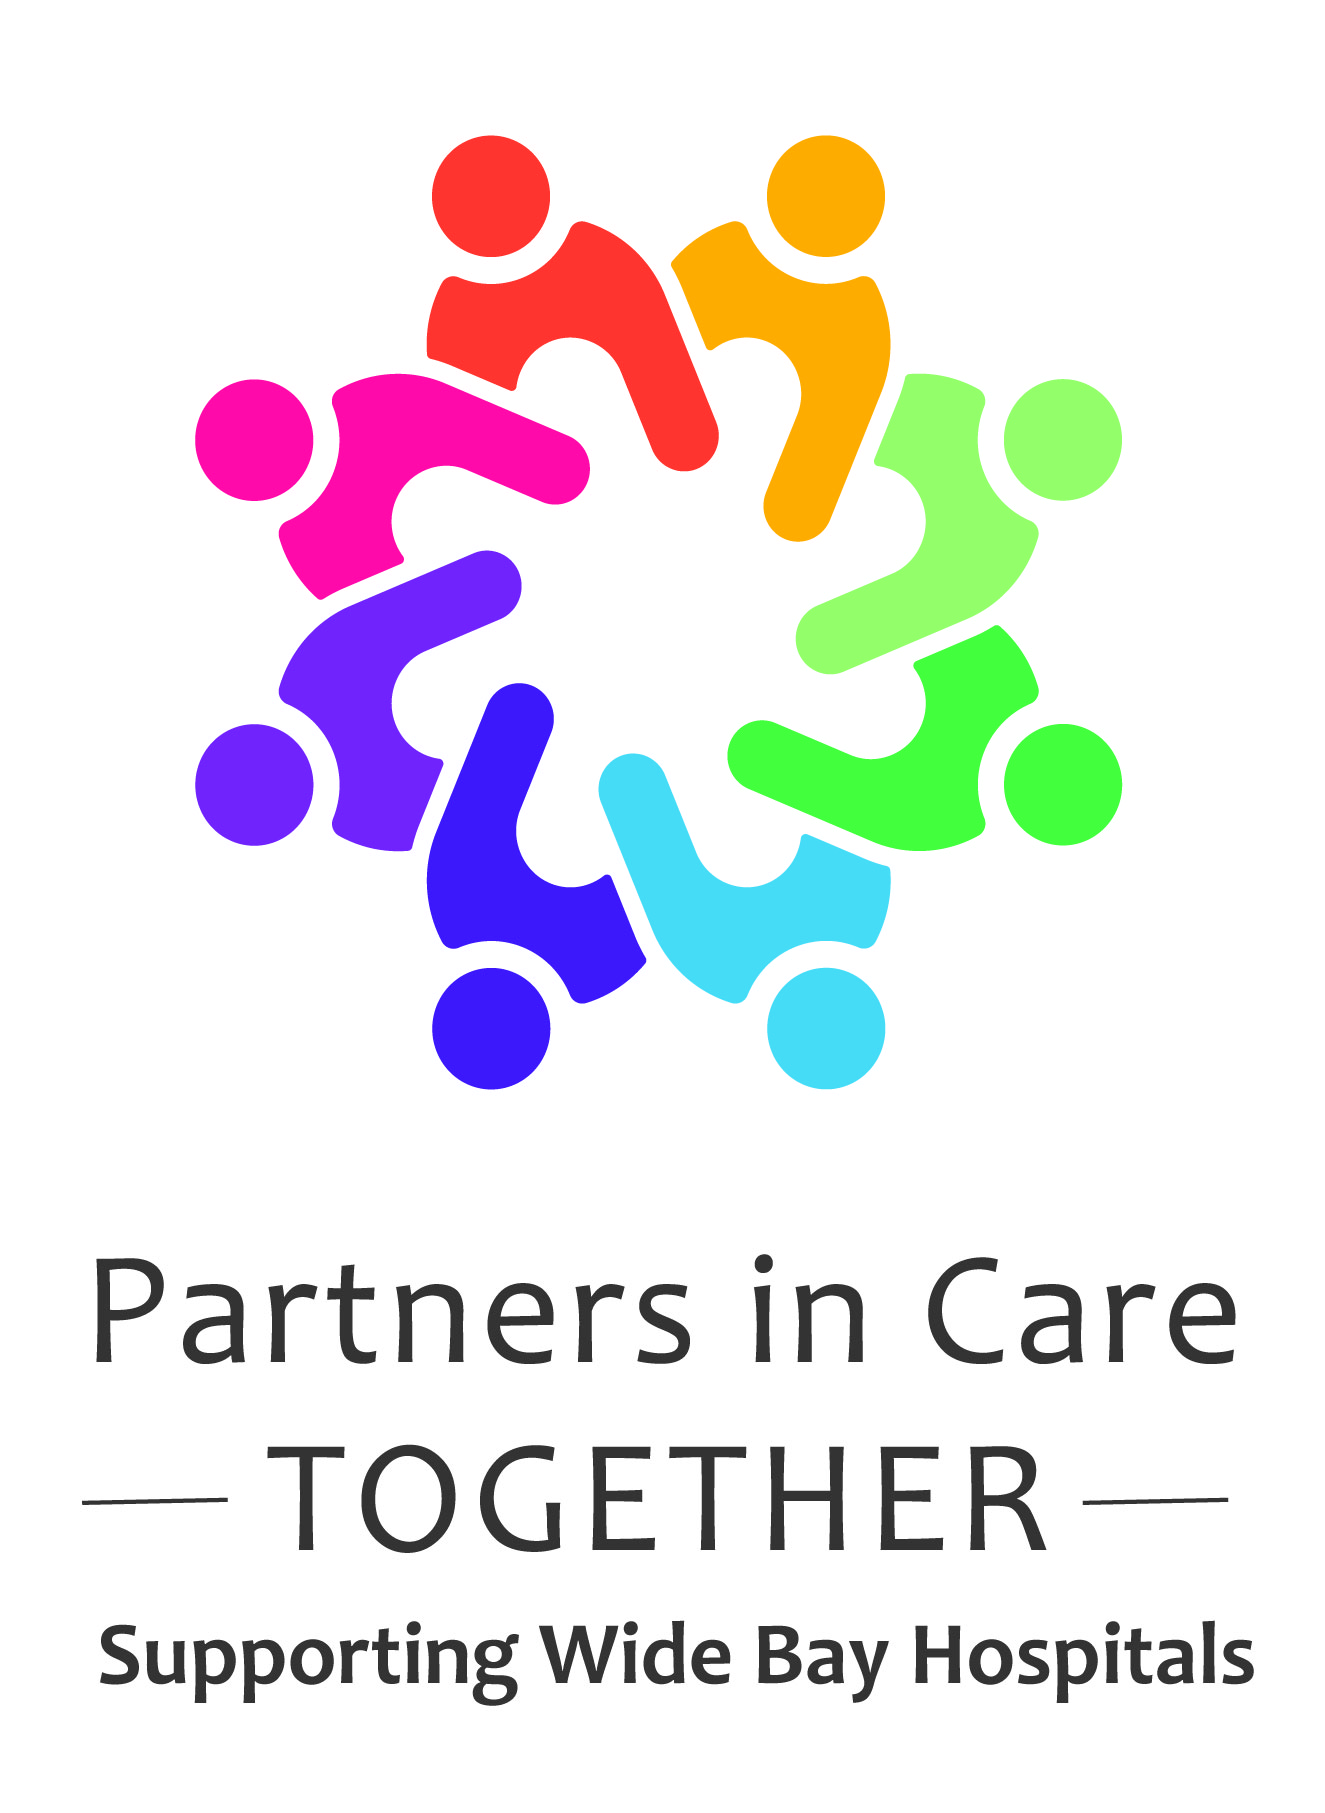 Partners in Care Together